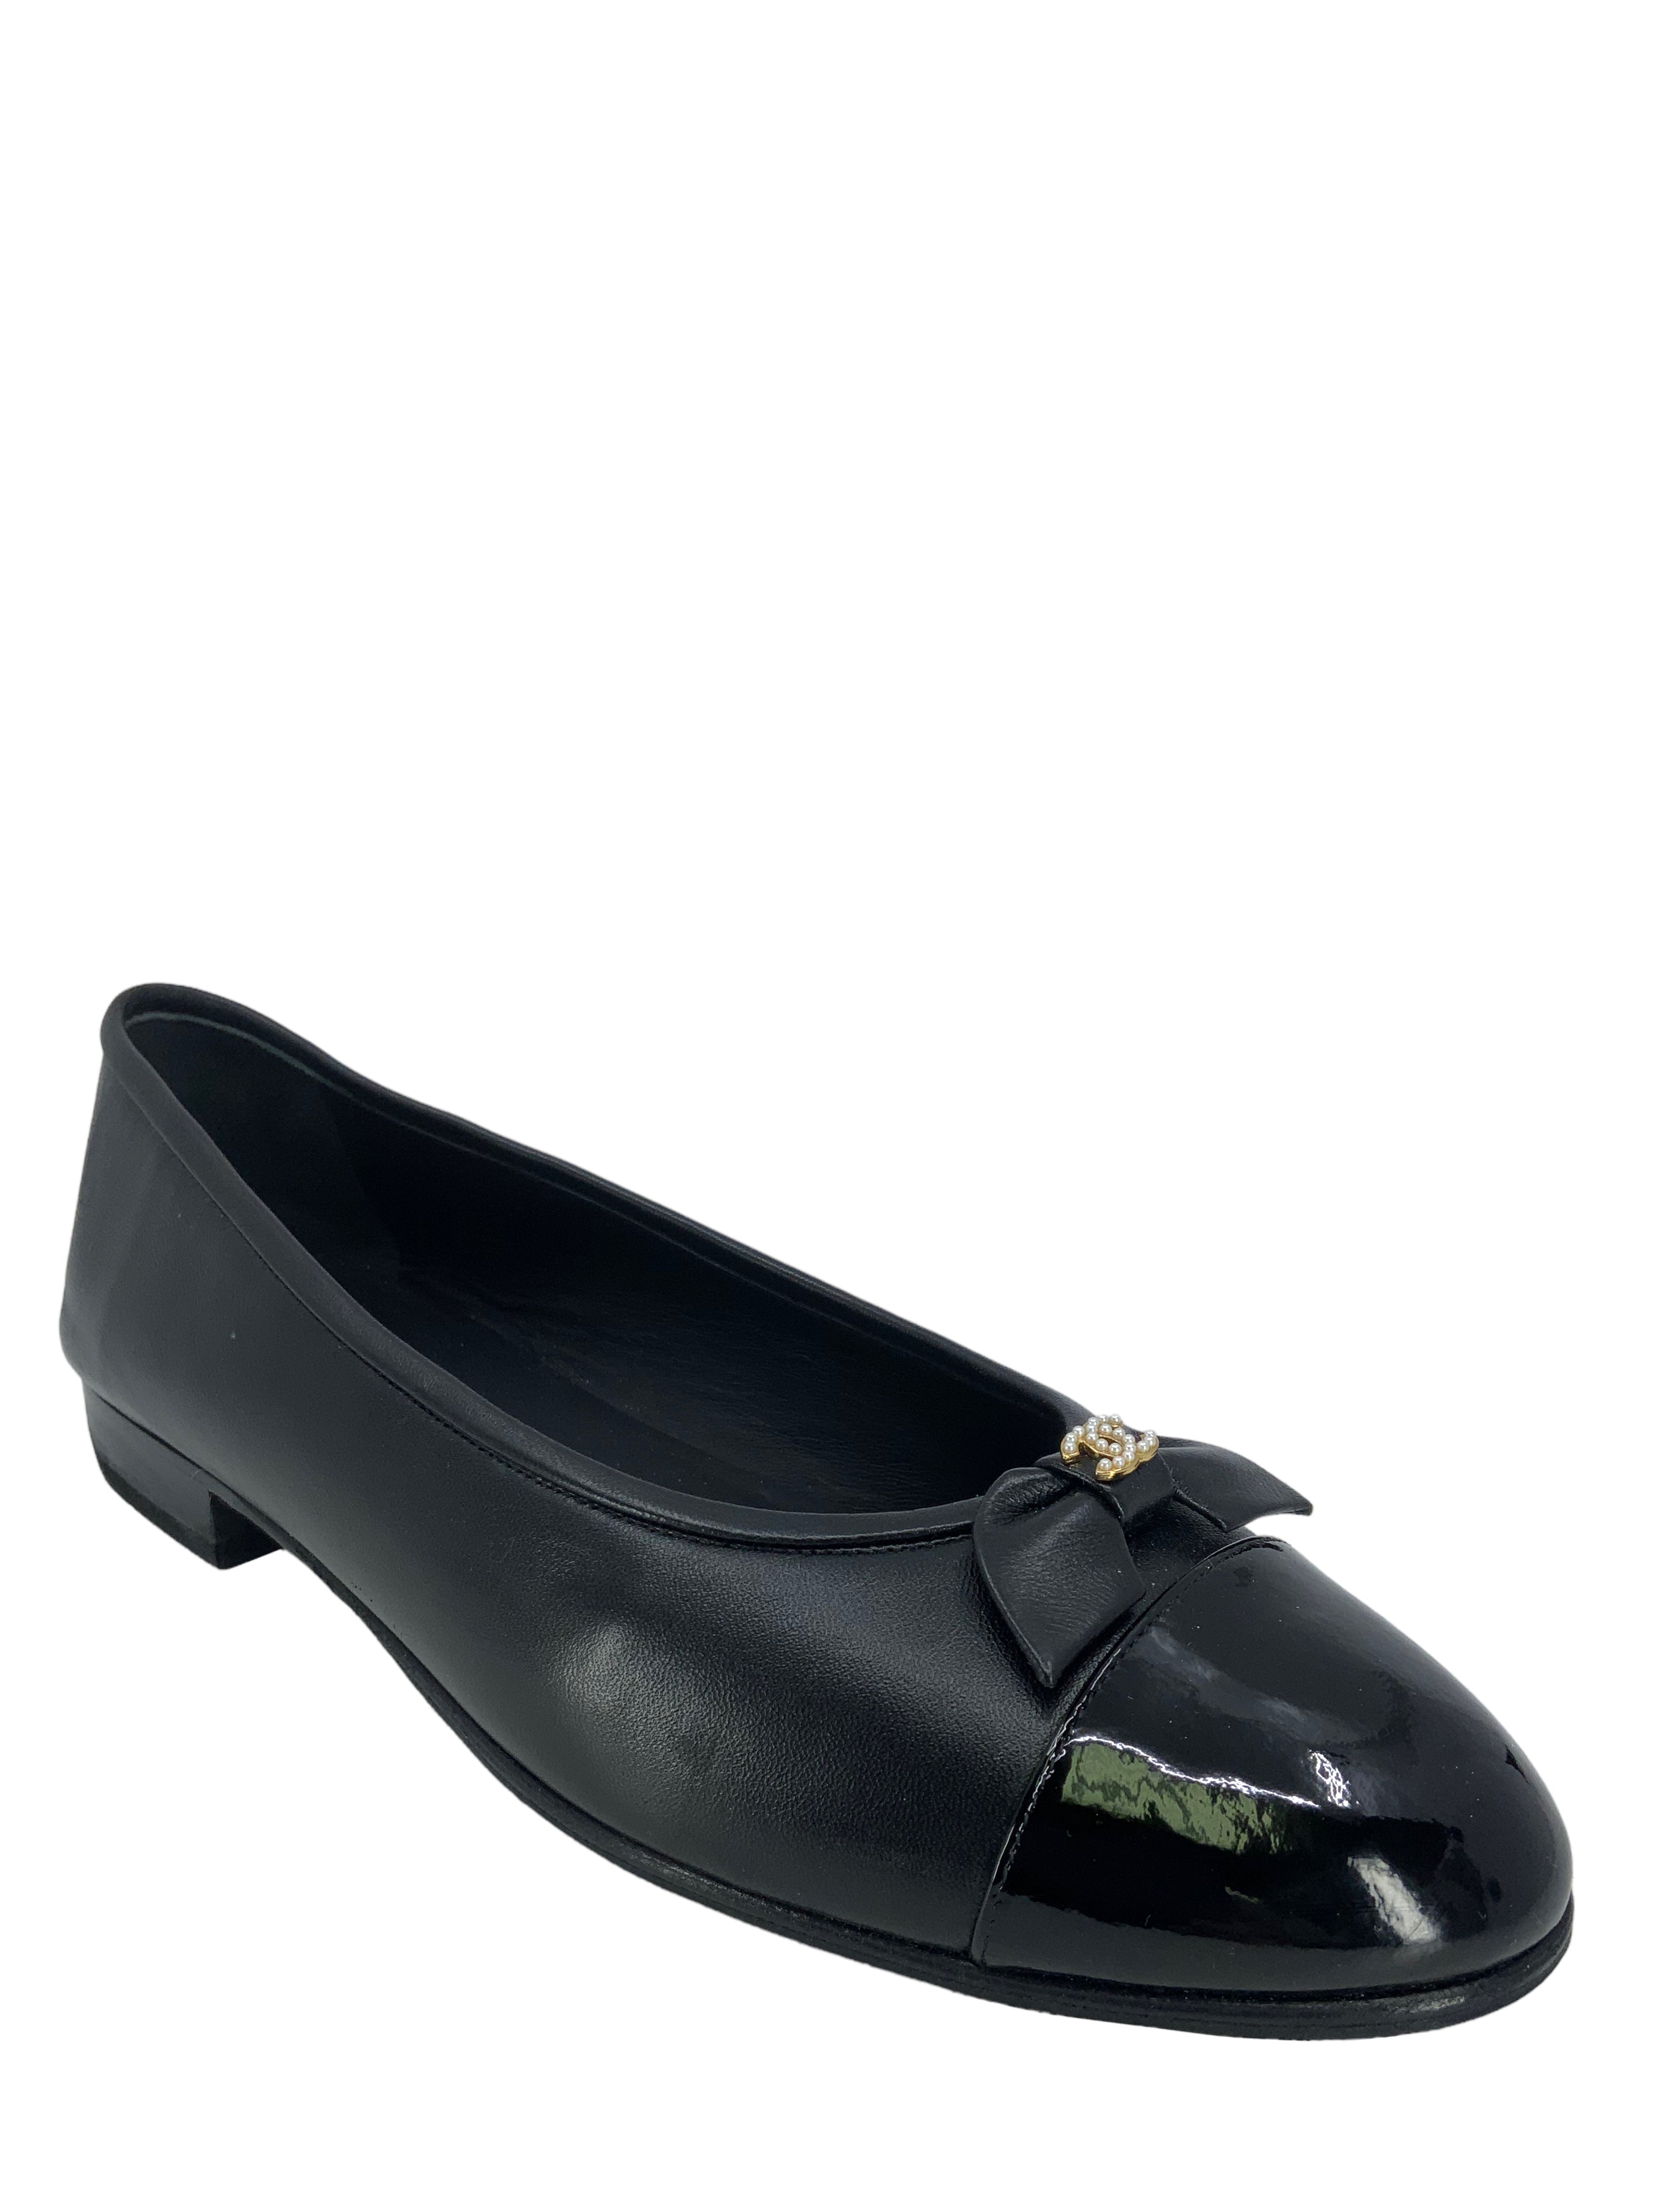 Chanel Black Mesh And Leather CC Bow Ballet Flats Size 37.5 Chanel | The  Luxury Closet